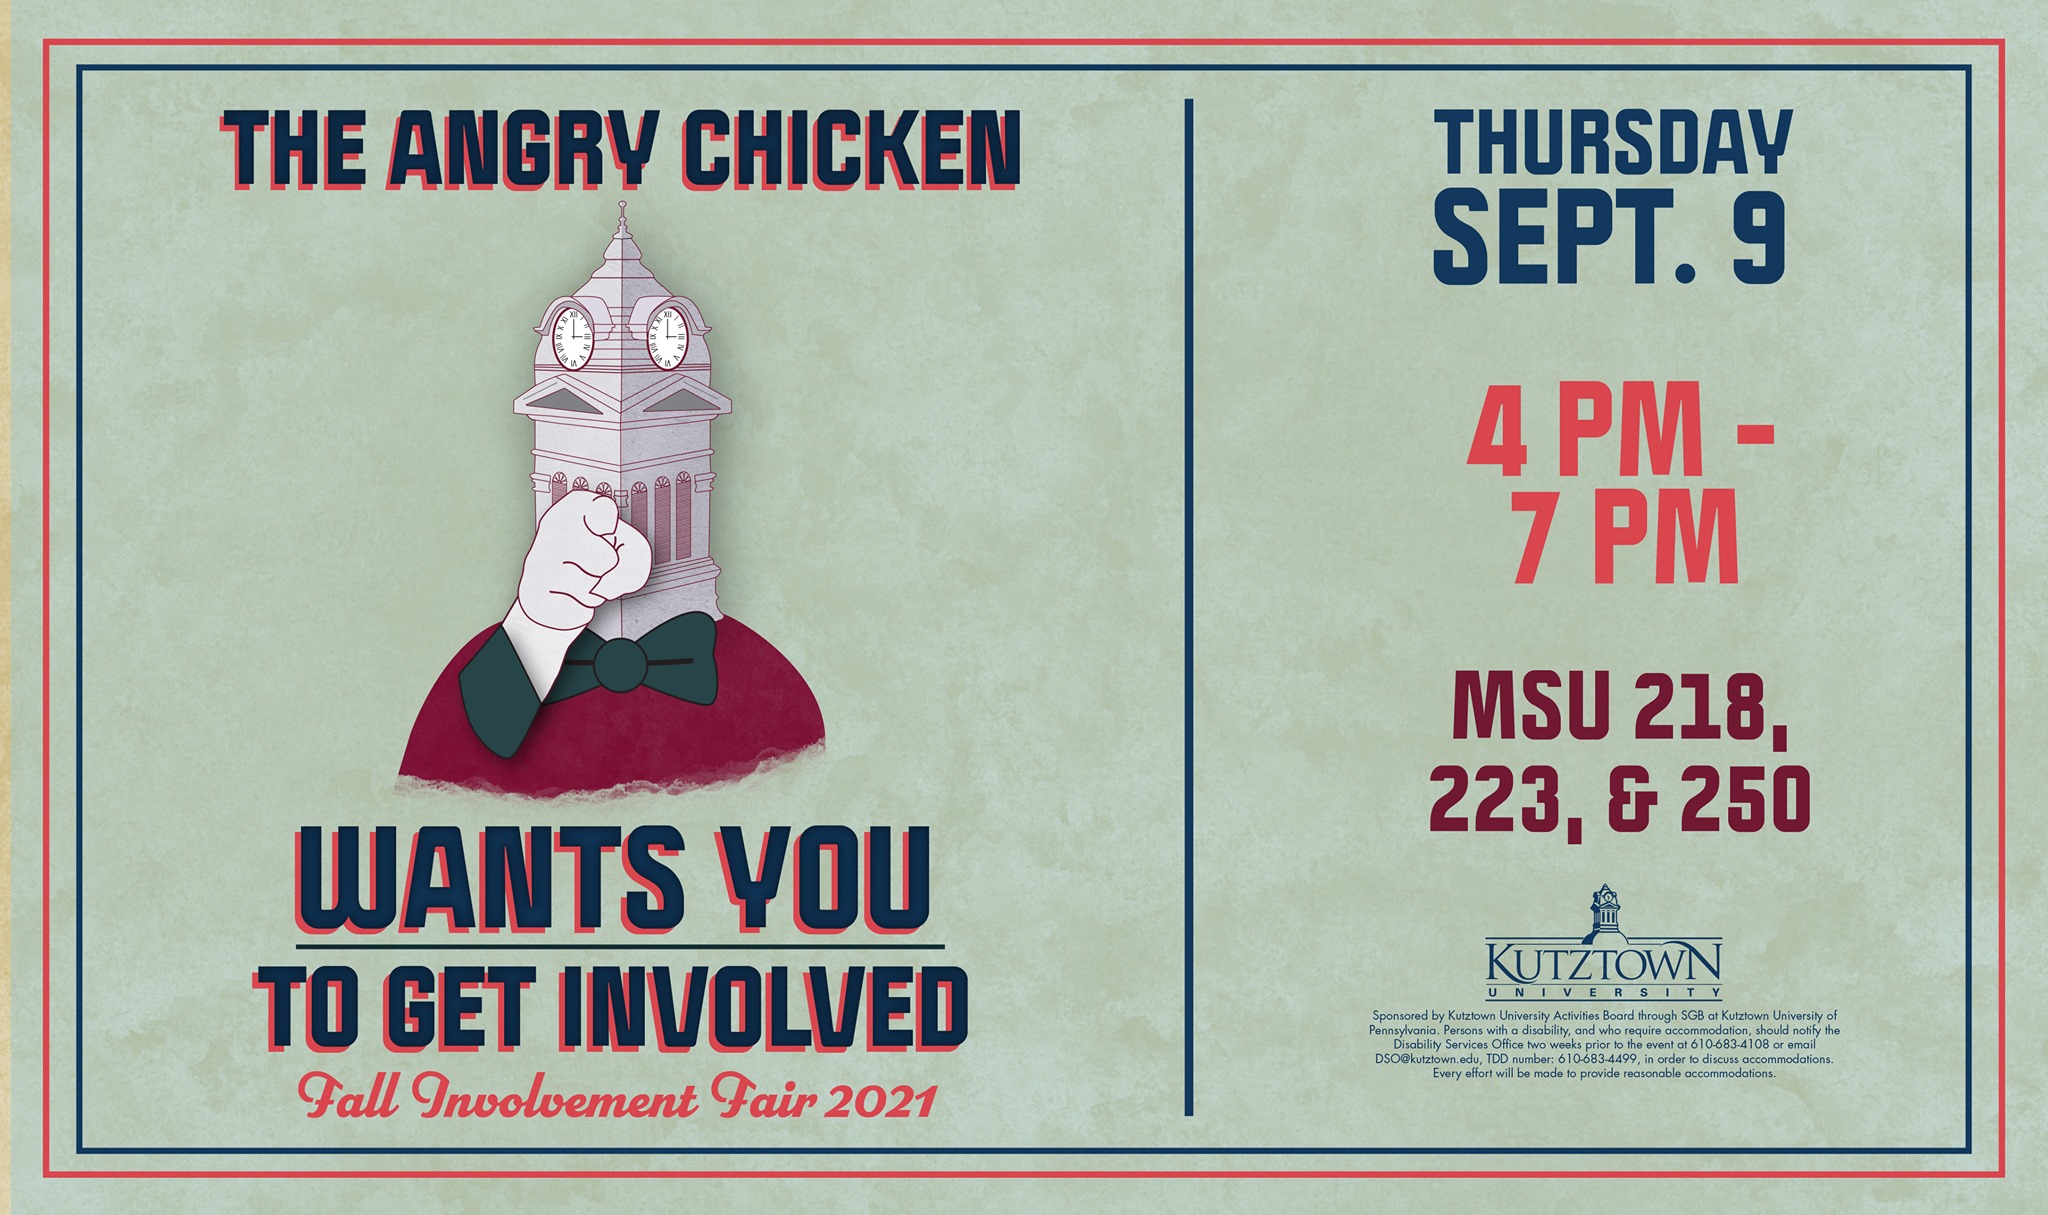 Image of the KU clock tower personified with a finger pointing toward the screen with text that reads "the angry chicken wants you to get involved, fall 2021 involvement fair, Thursday sept. 8 4 PM-PM MSU 218 223 250" and the Kutztown University logo